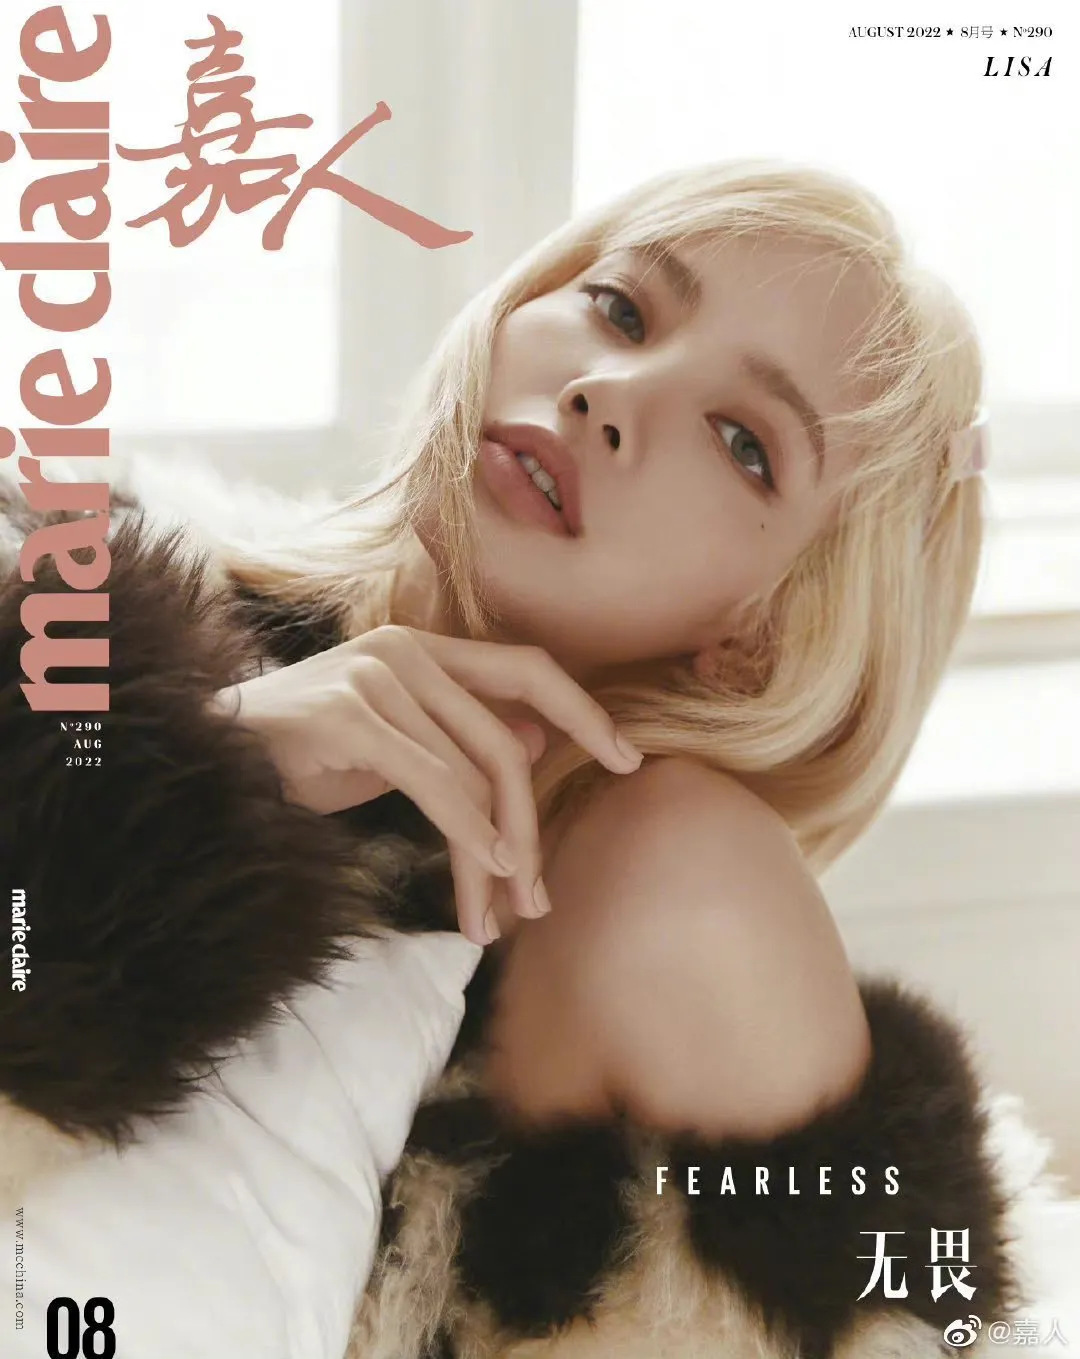 lisa-blackpink-marie-claire-thang-8-1